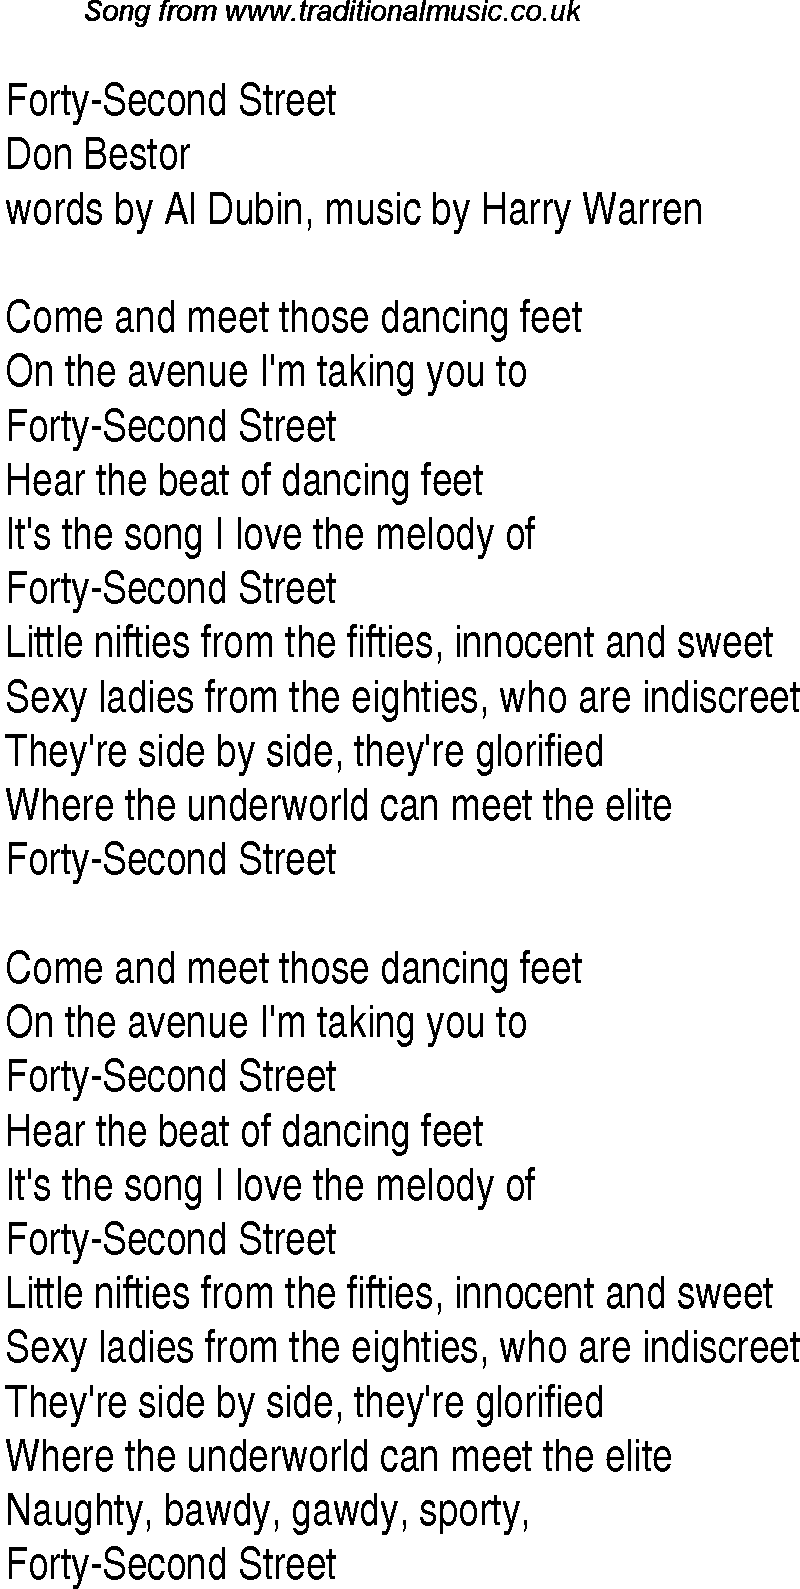 Music charts top songs 1933 - lyrics for Forty-second Street